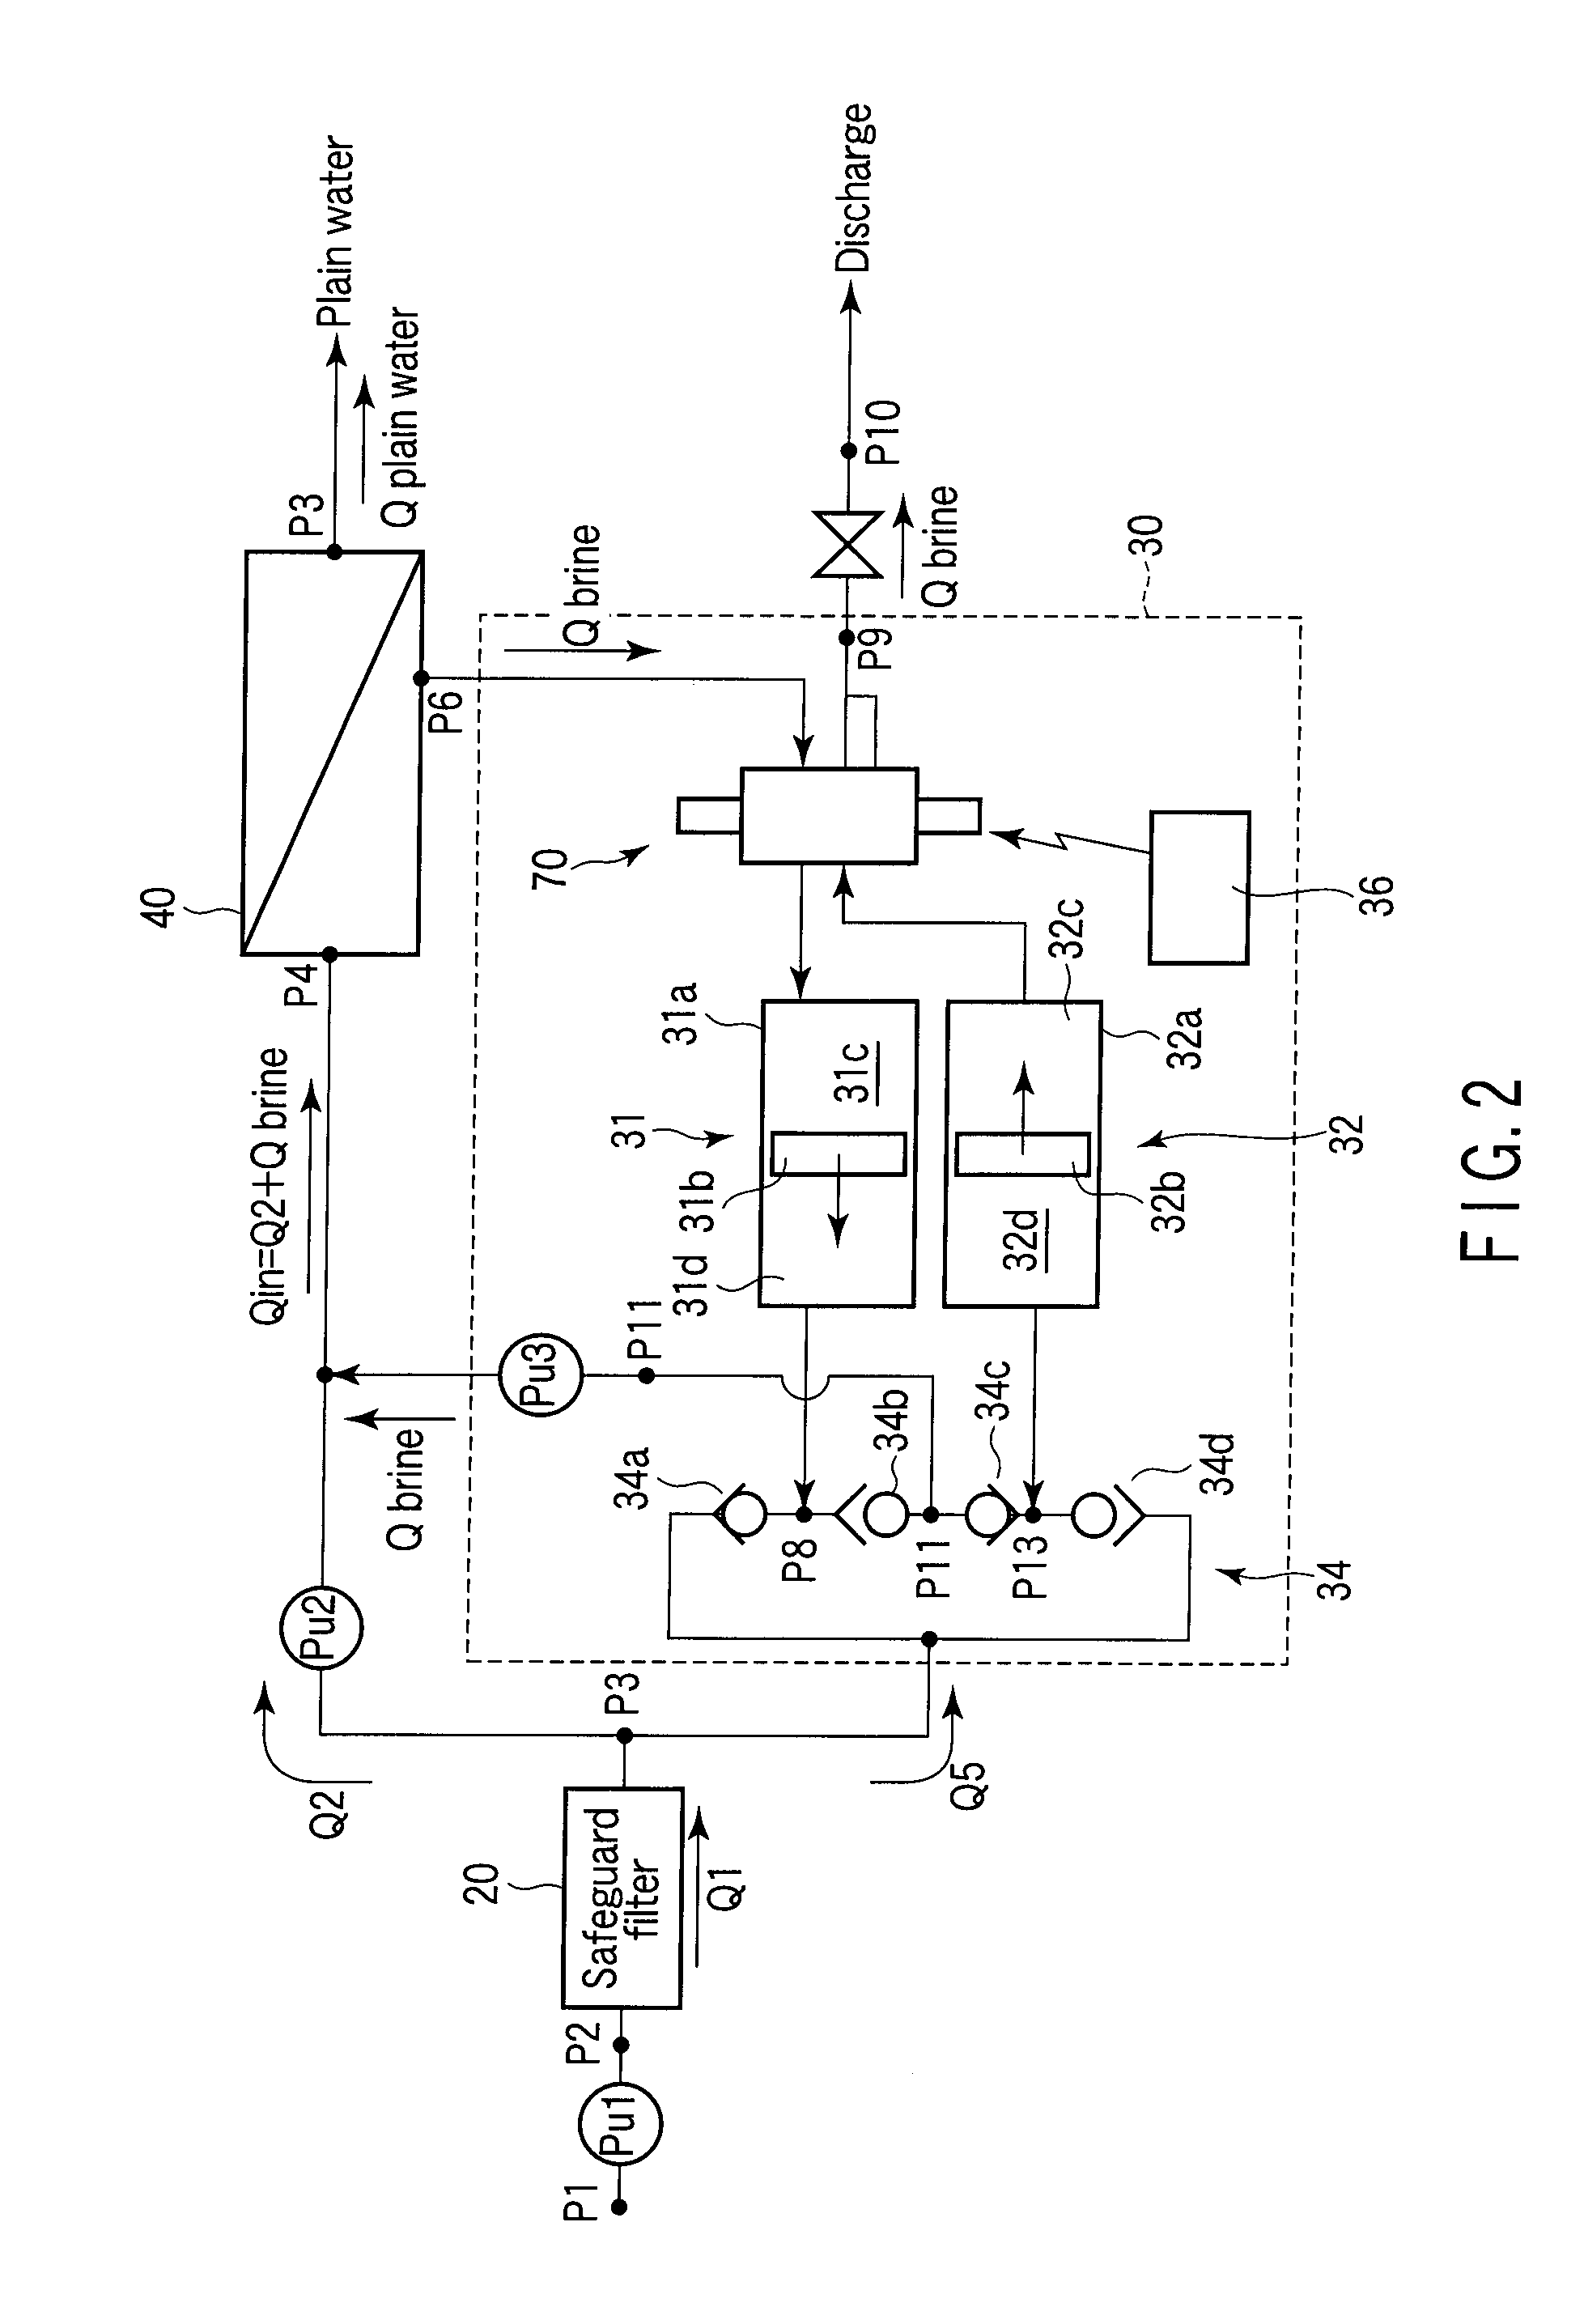 Flow channel switching device